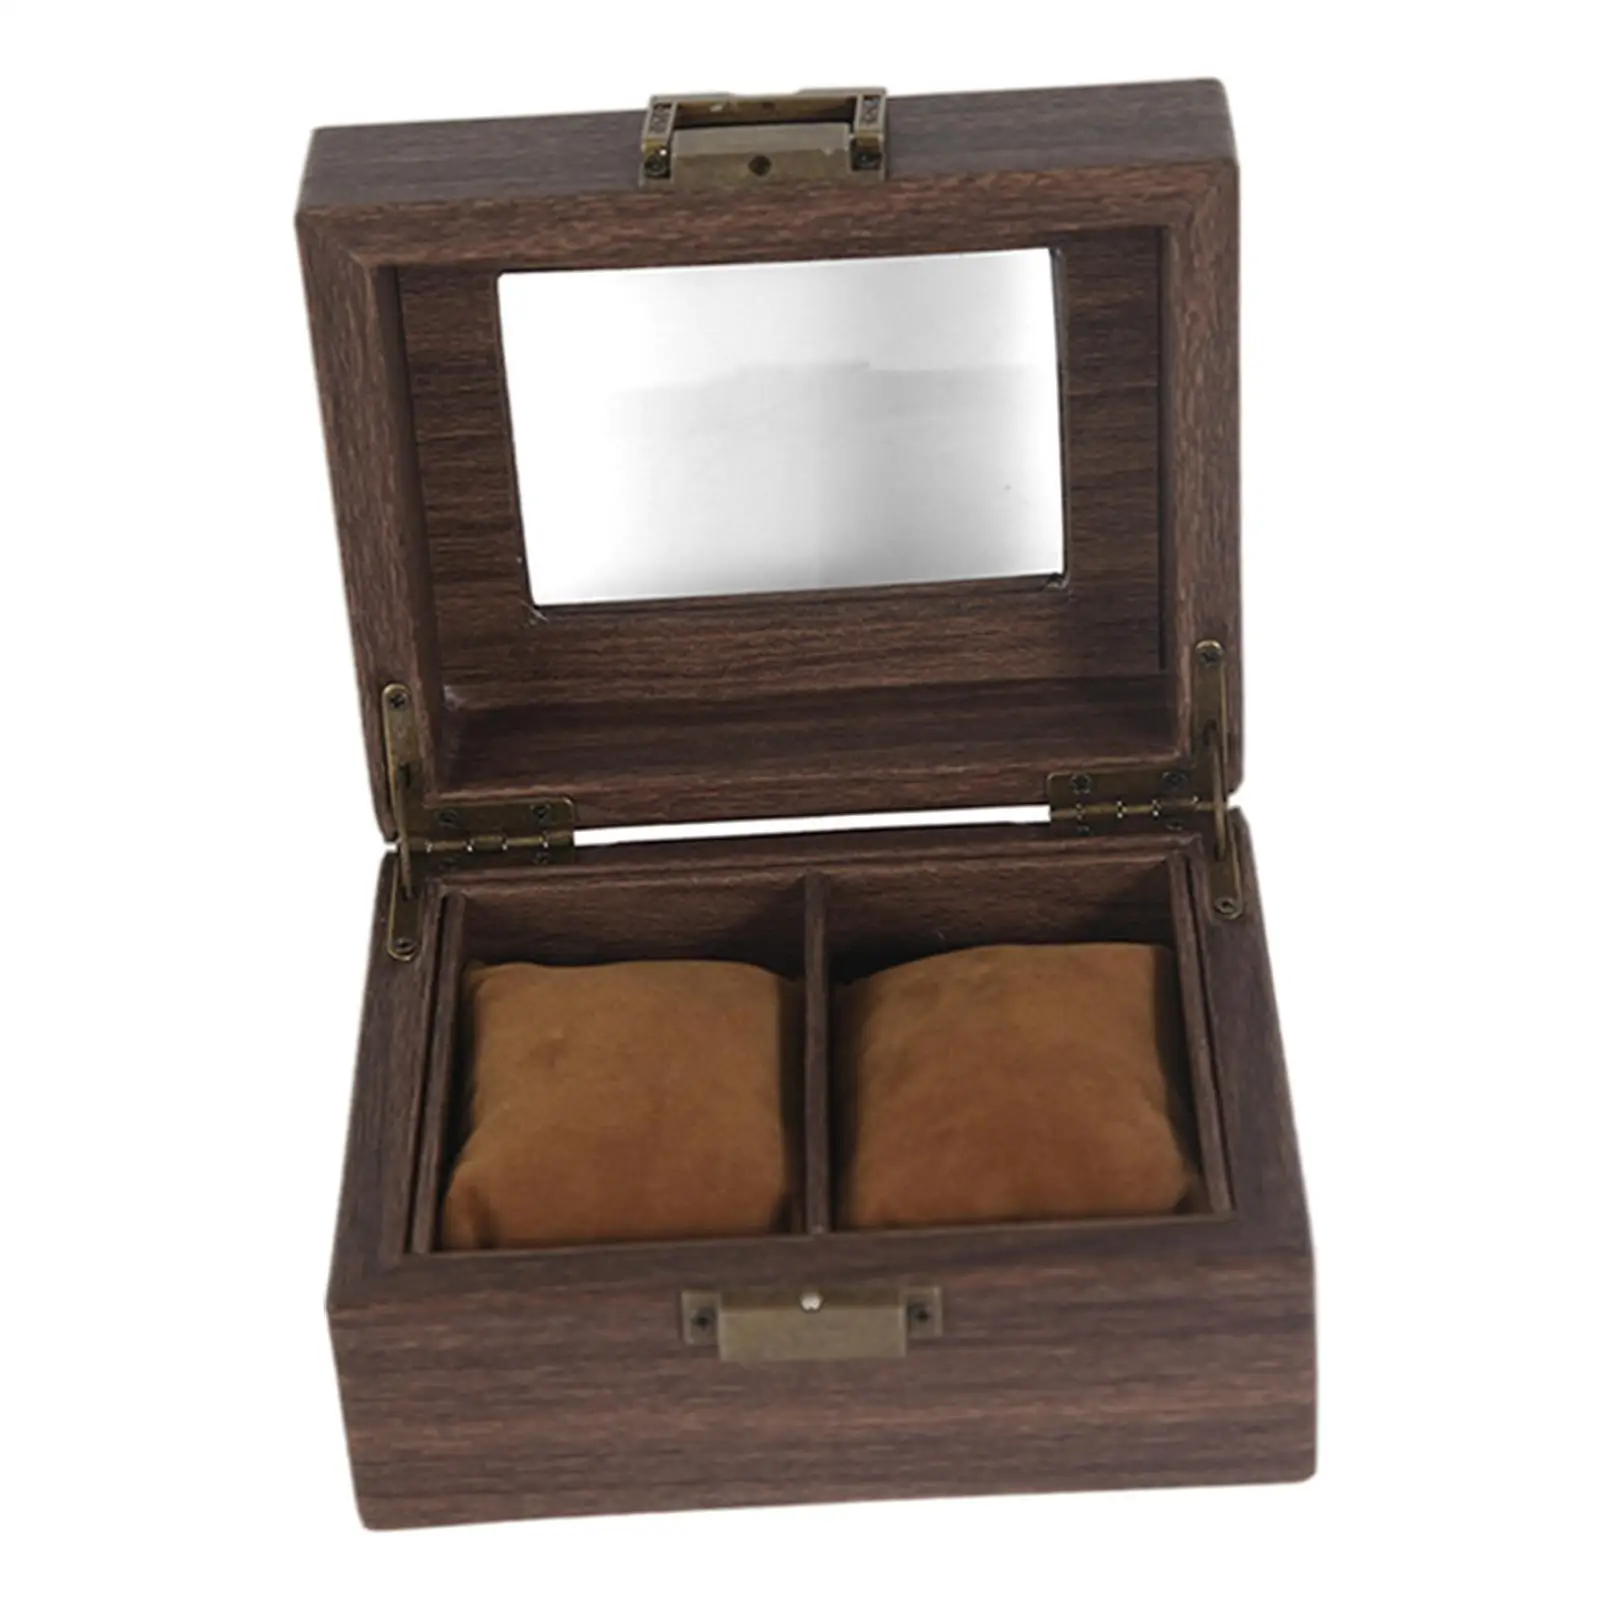 Watch Display Case and Lock Portable W/Clear Top Wooden 2 Slot Jewelry Organizer Wrist Storage Box for Gifts Men Women